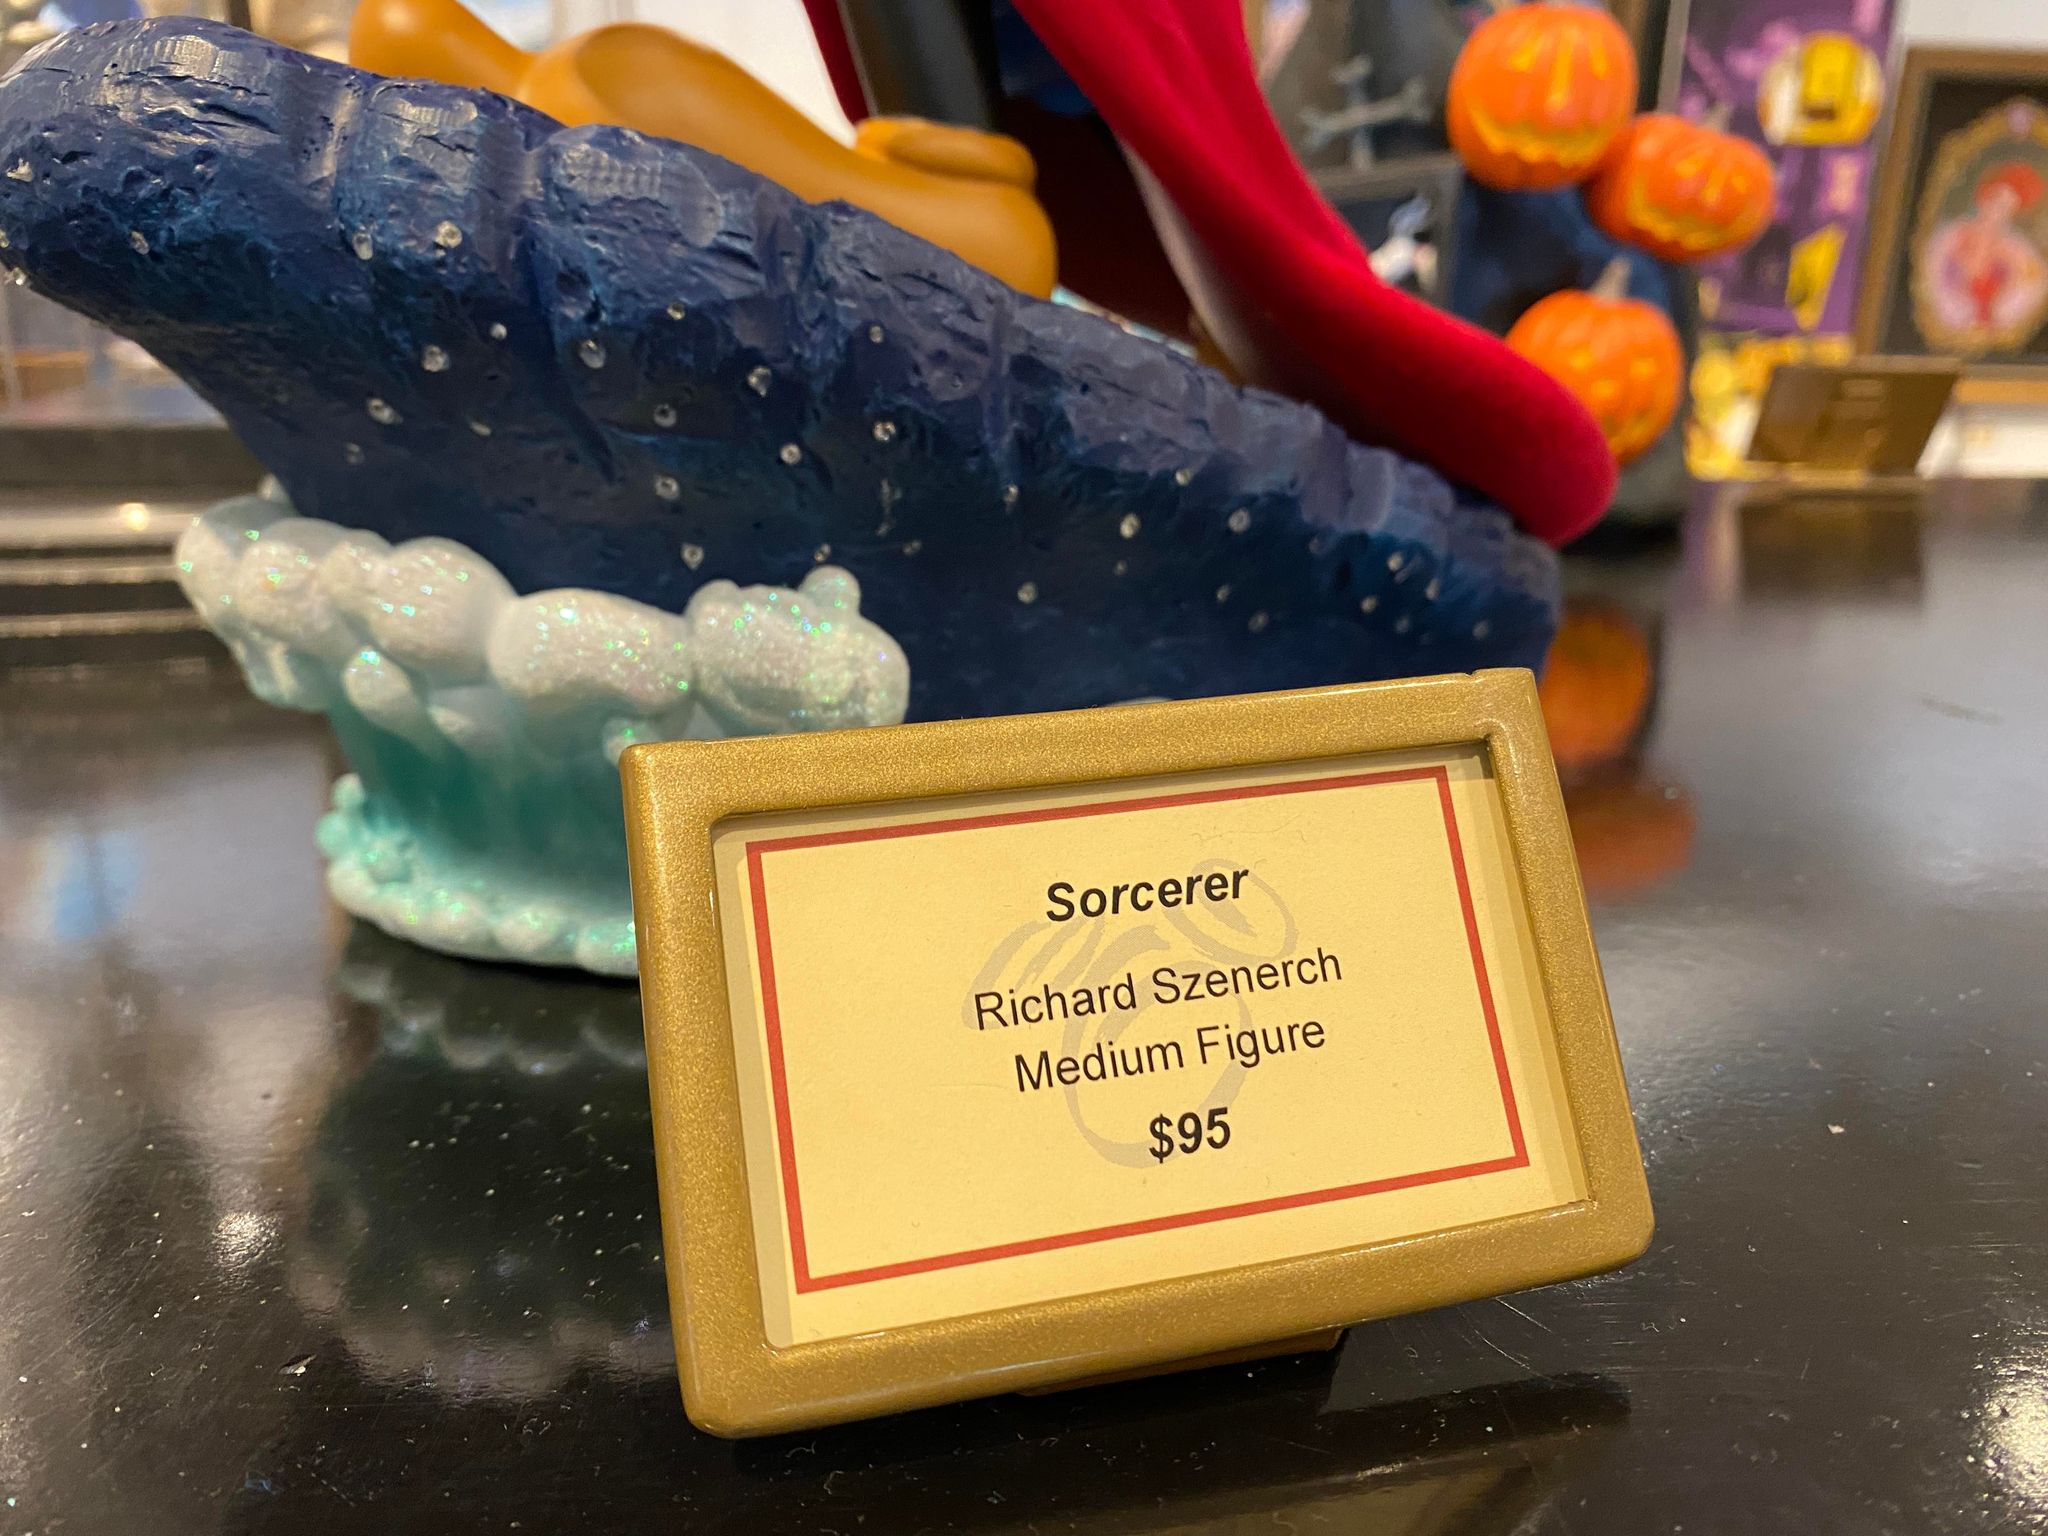 Price Tag of Sorcerer Mickey statue at Art of Disney